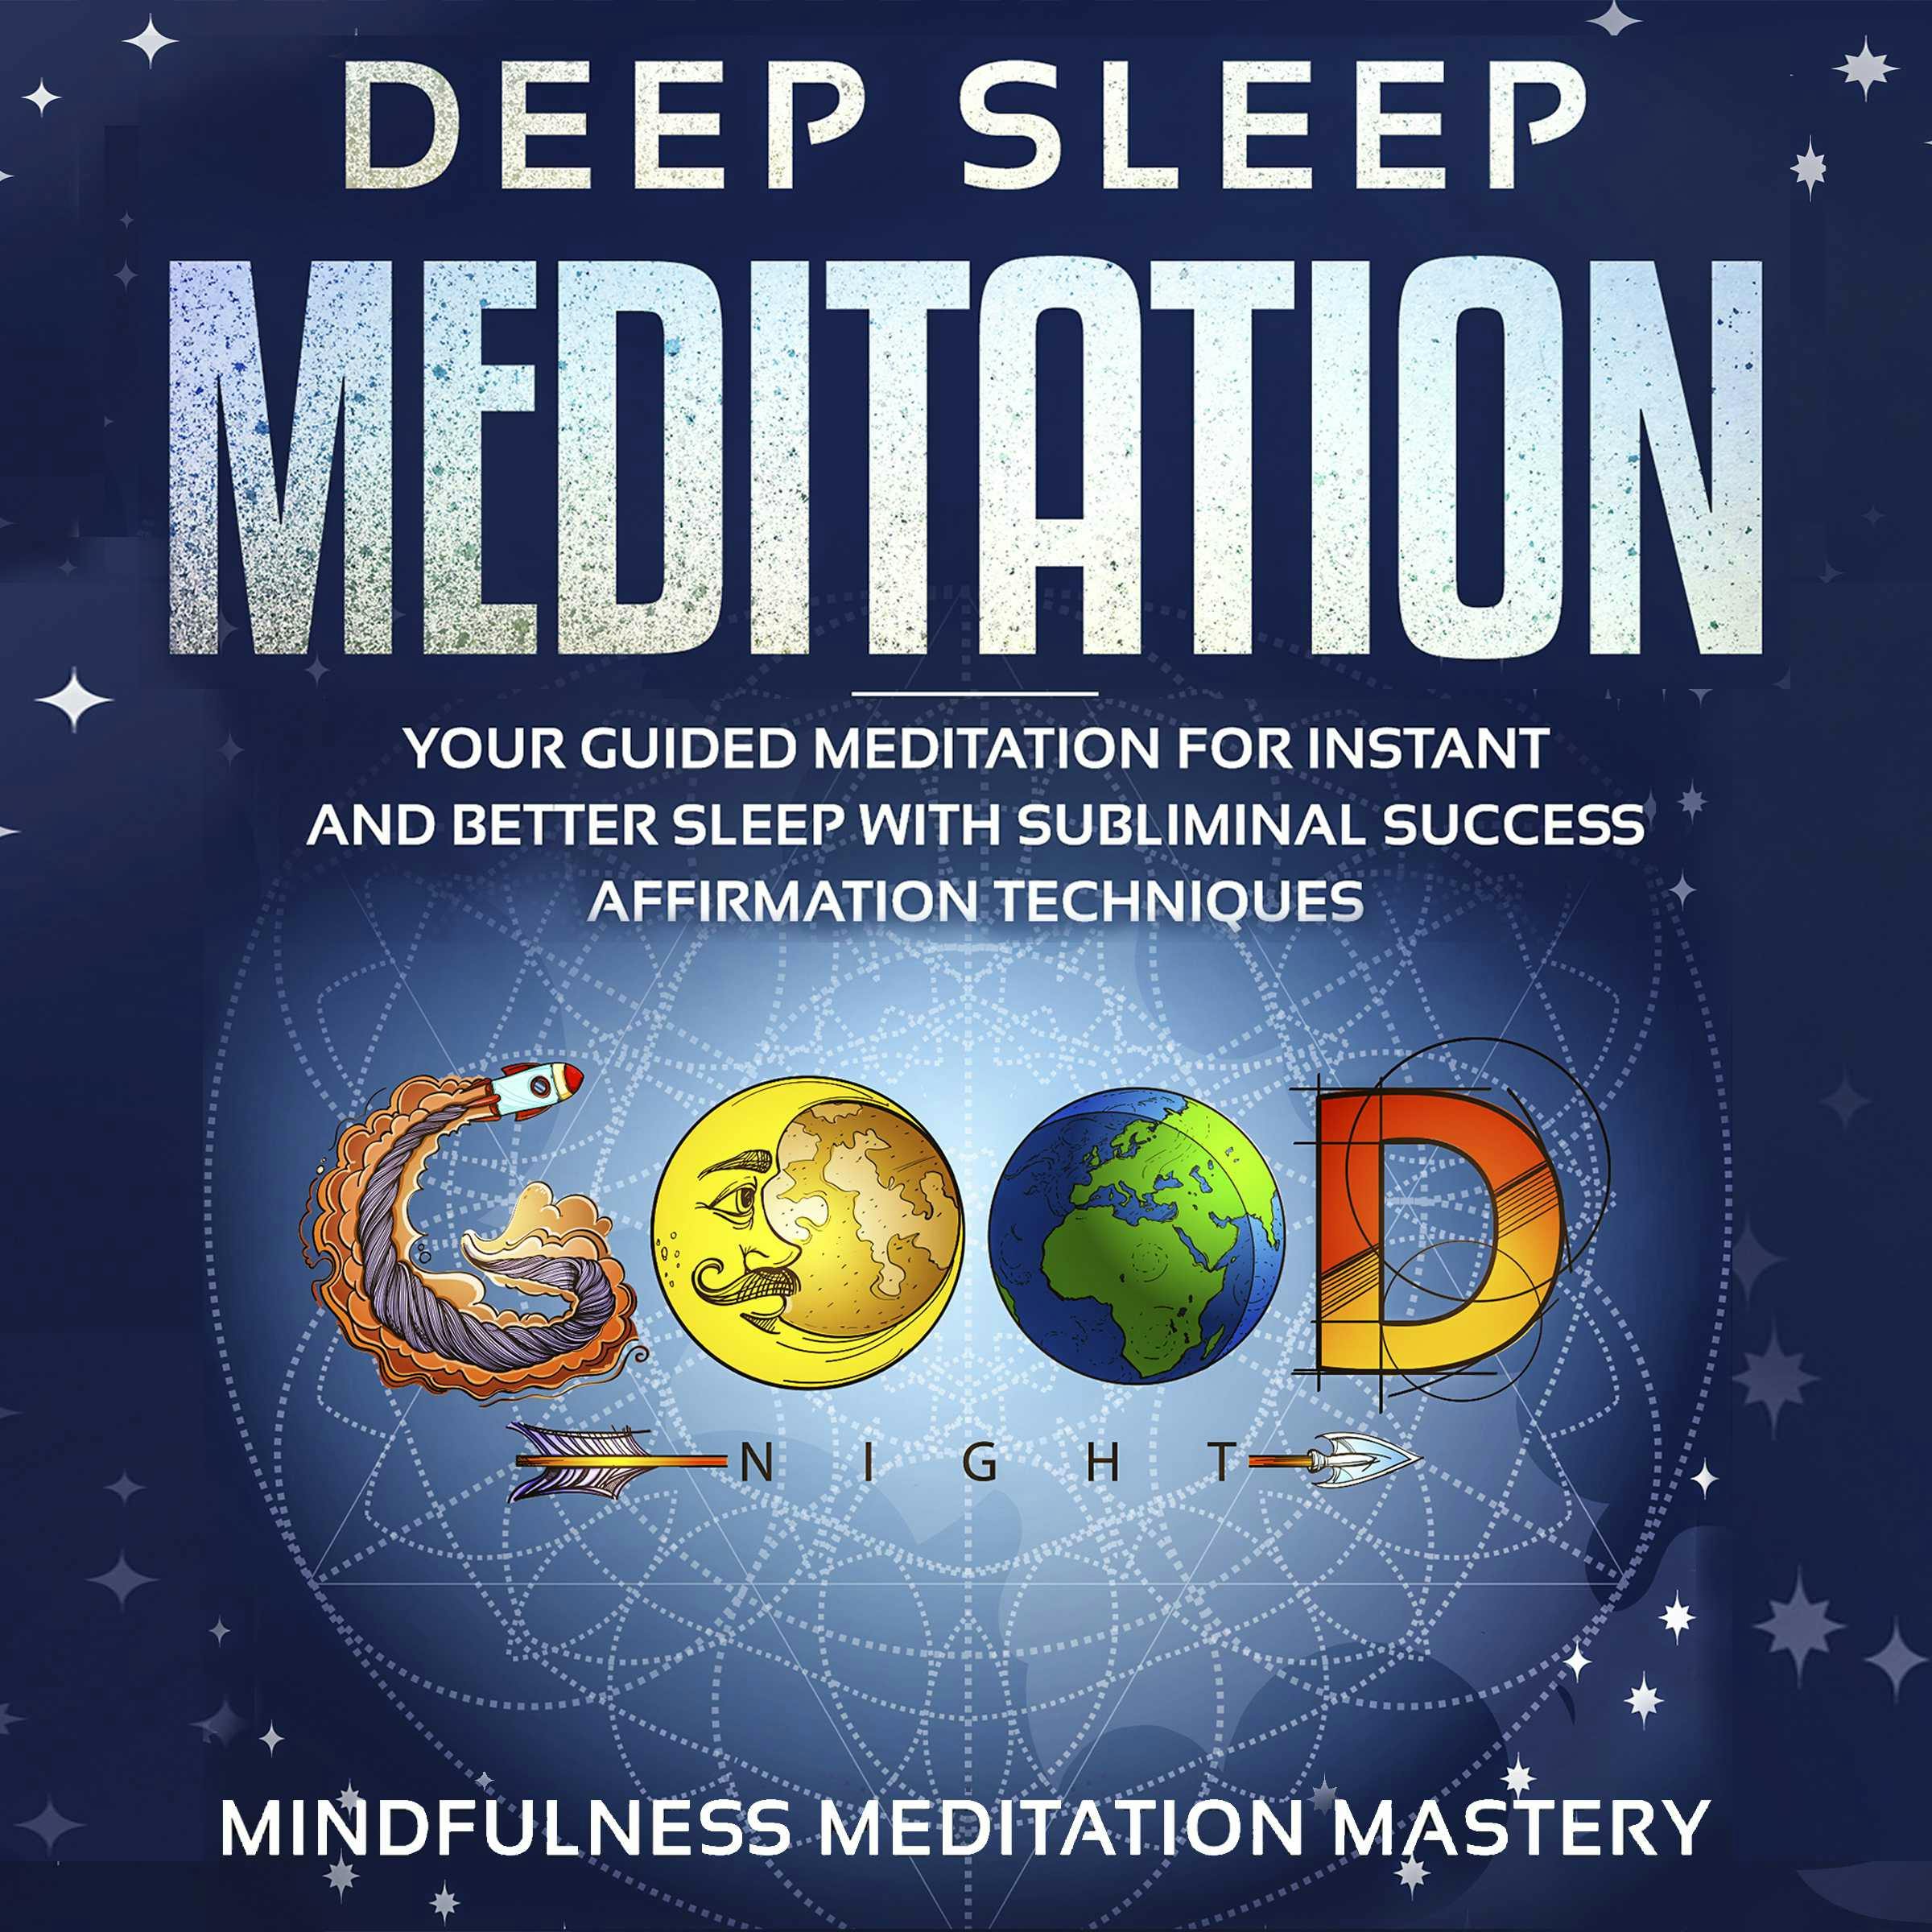 Deep Sleep Meditation: Your Guided Meditation for Instant and Better Sleep with Subliminal Success Affirmation Techniques Kindle Edition - Mindfulness Meditation Mastery